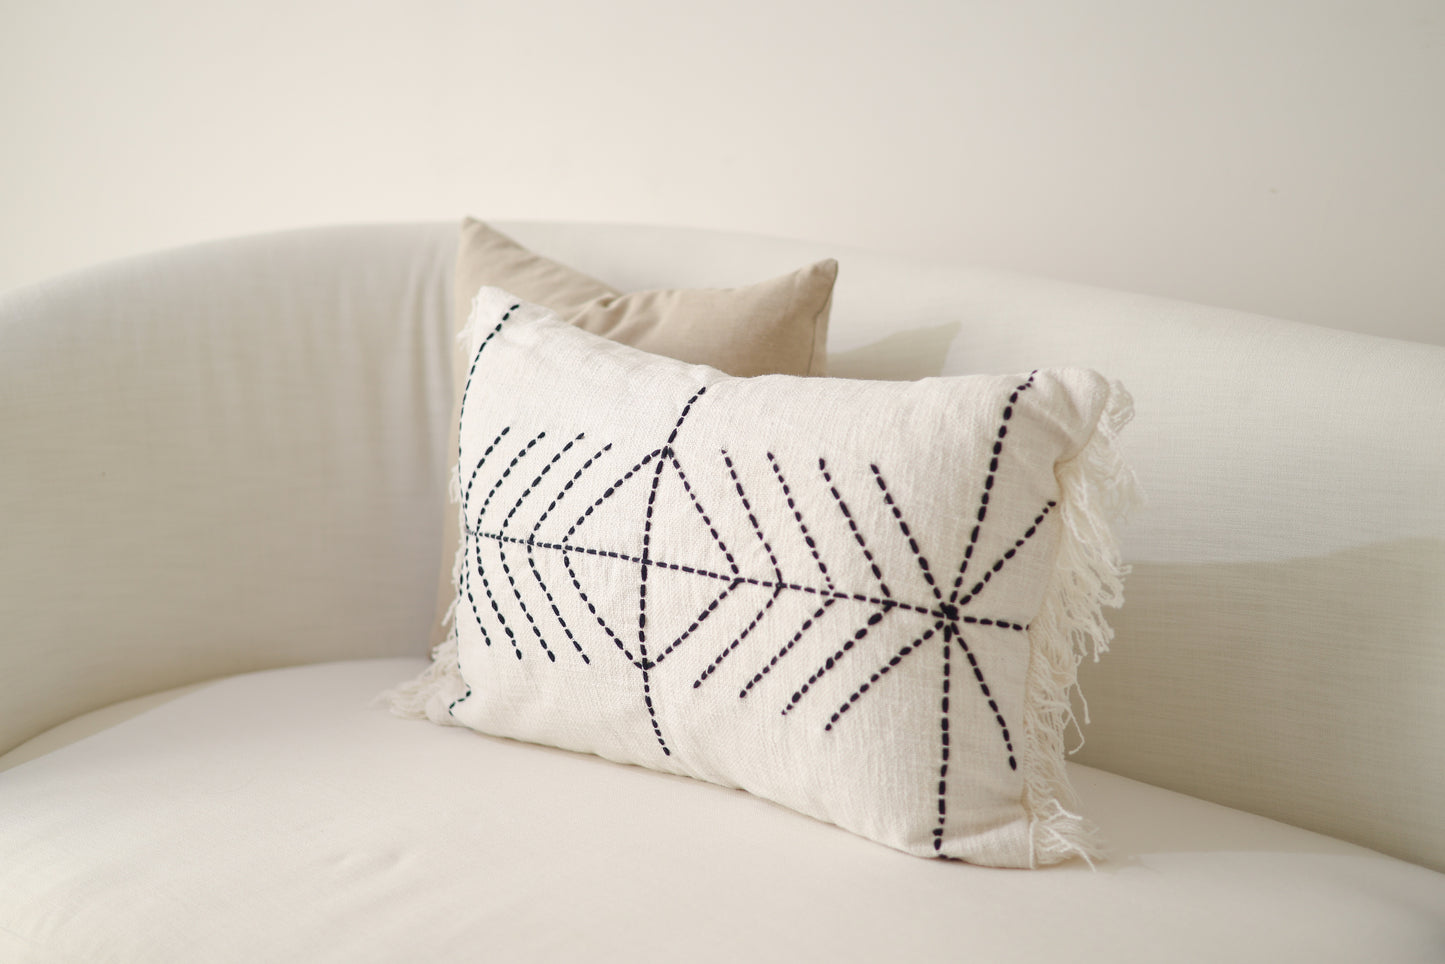 Stitched diamond cotton cushion cover with fringe